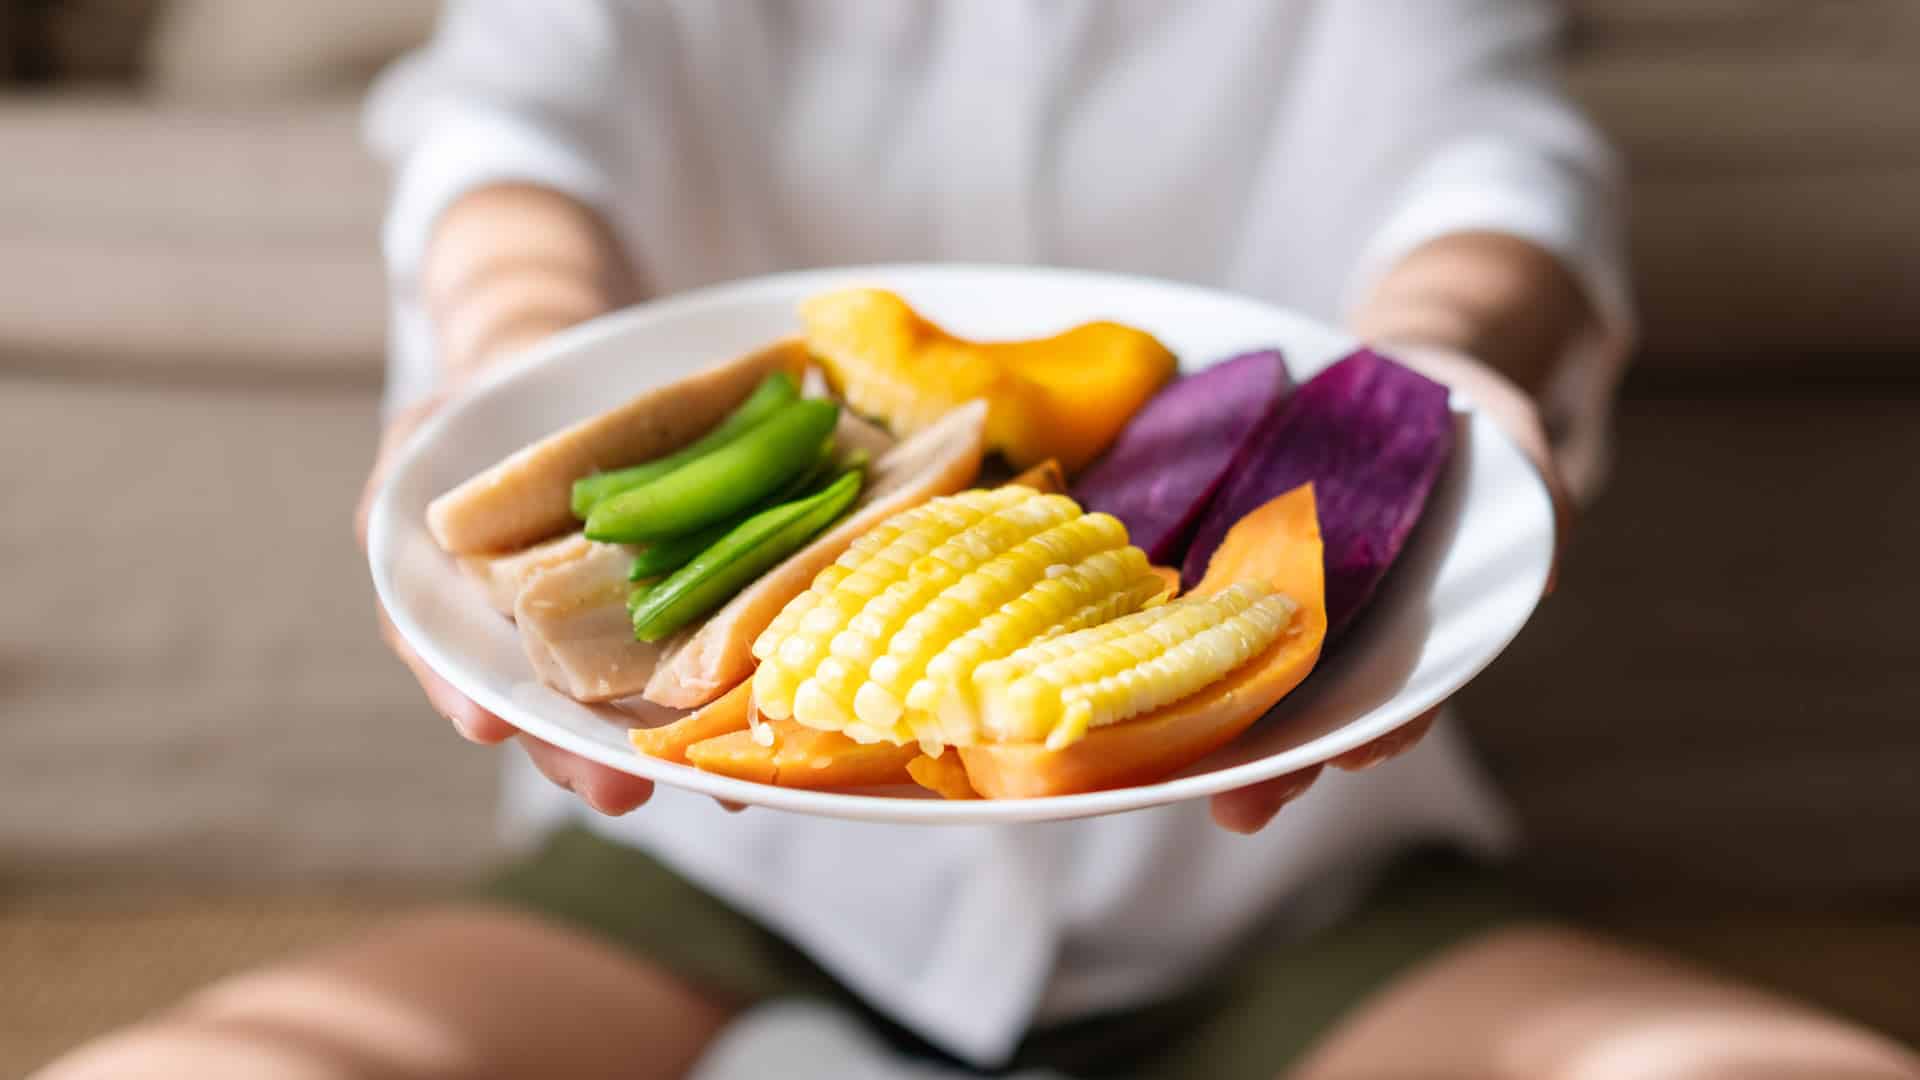 sliced vegetables on a white plate being held out